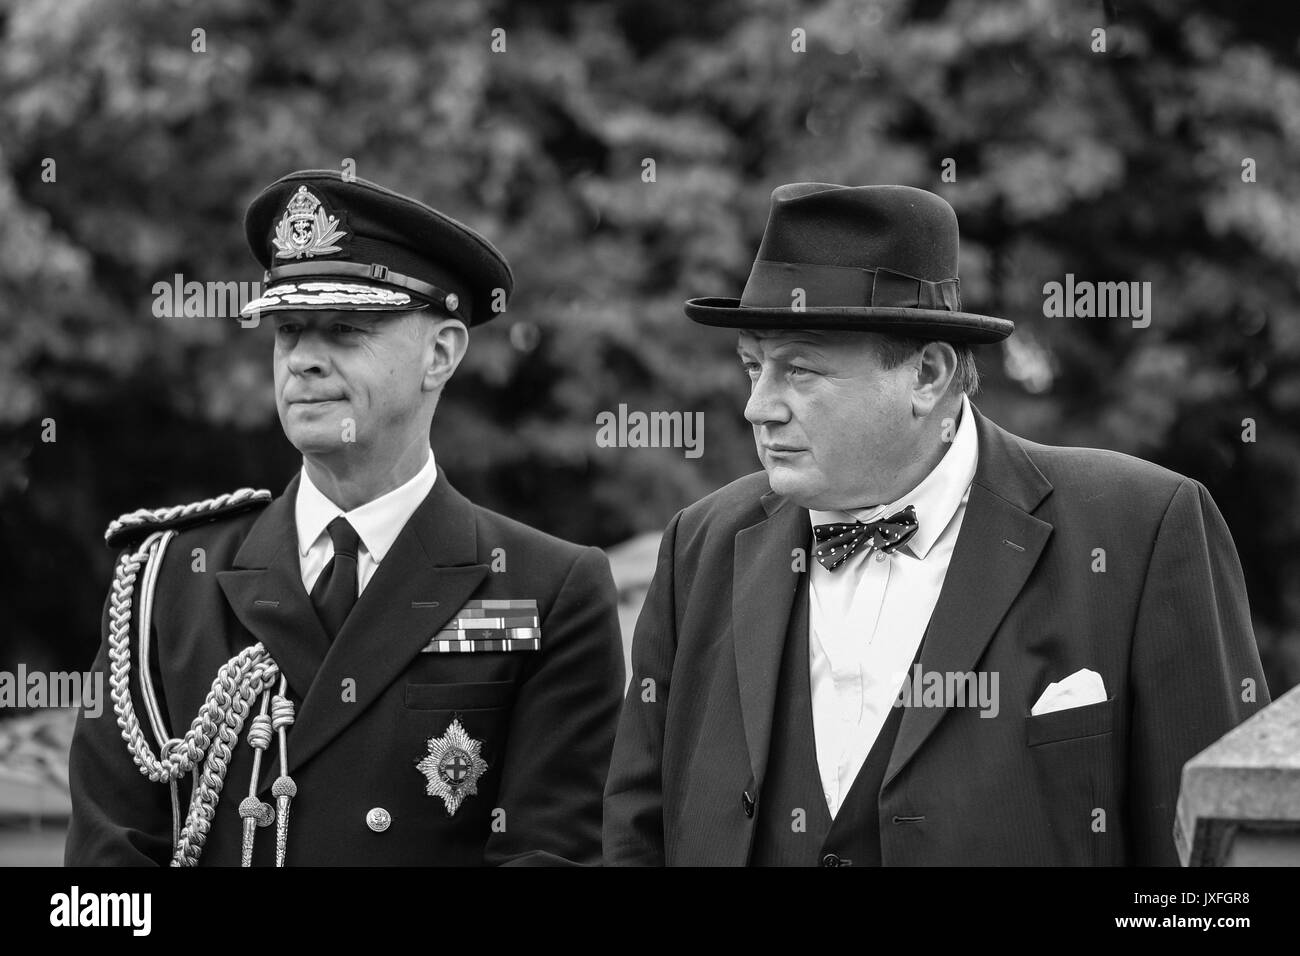 1940s Evento, National Tramway Museum, Crich, Agosto 2017 Foto Stock